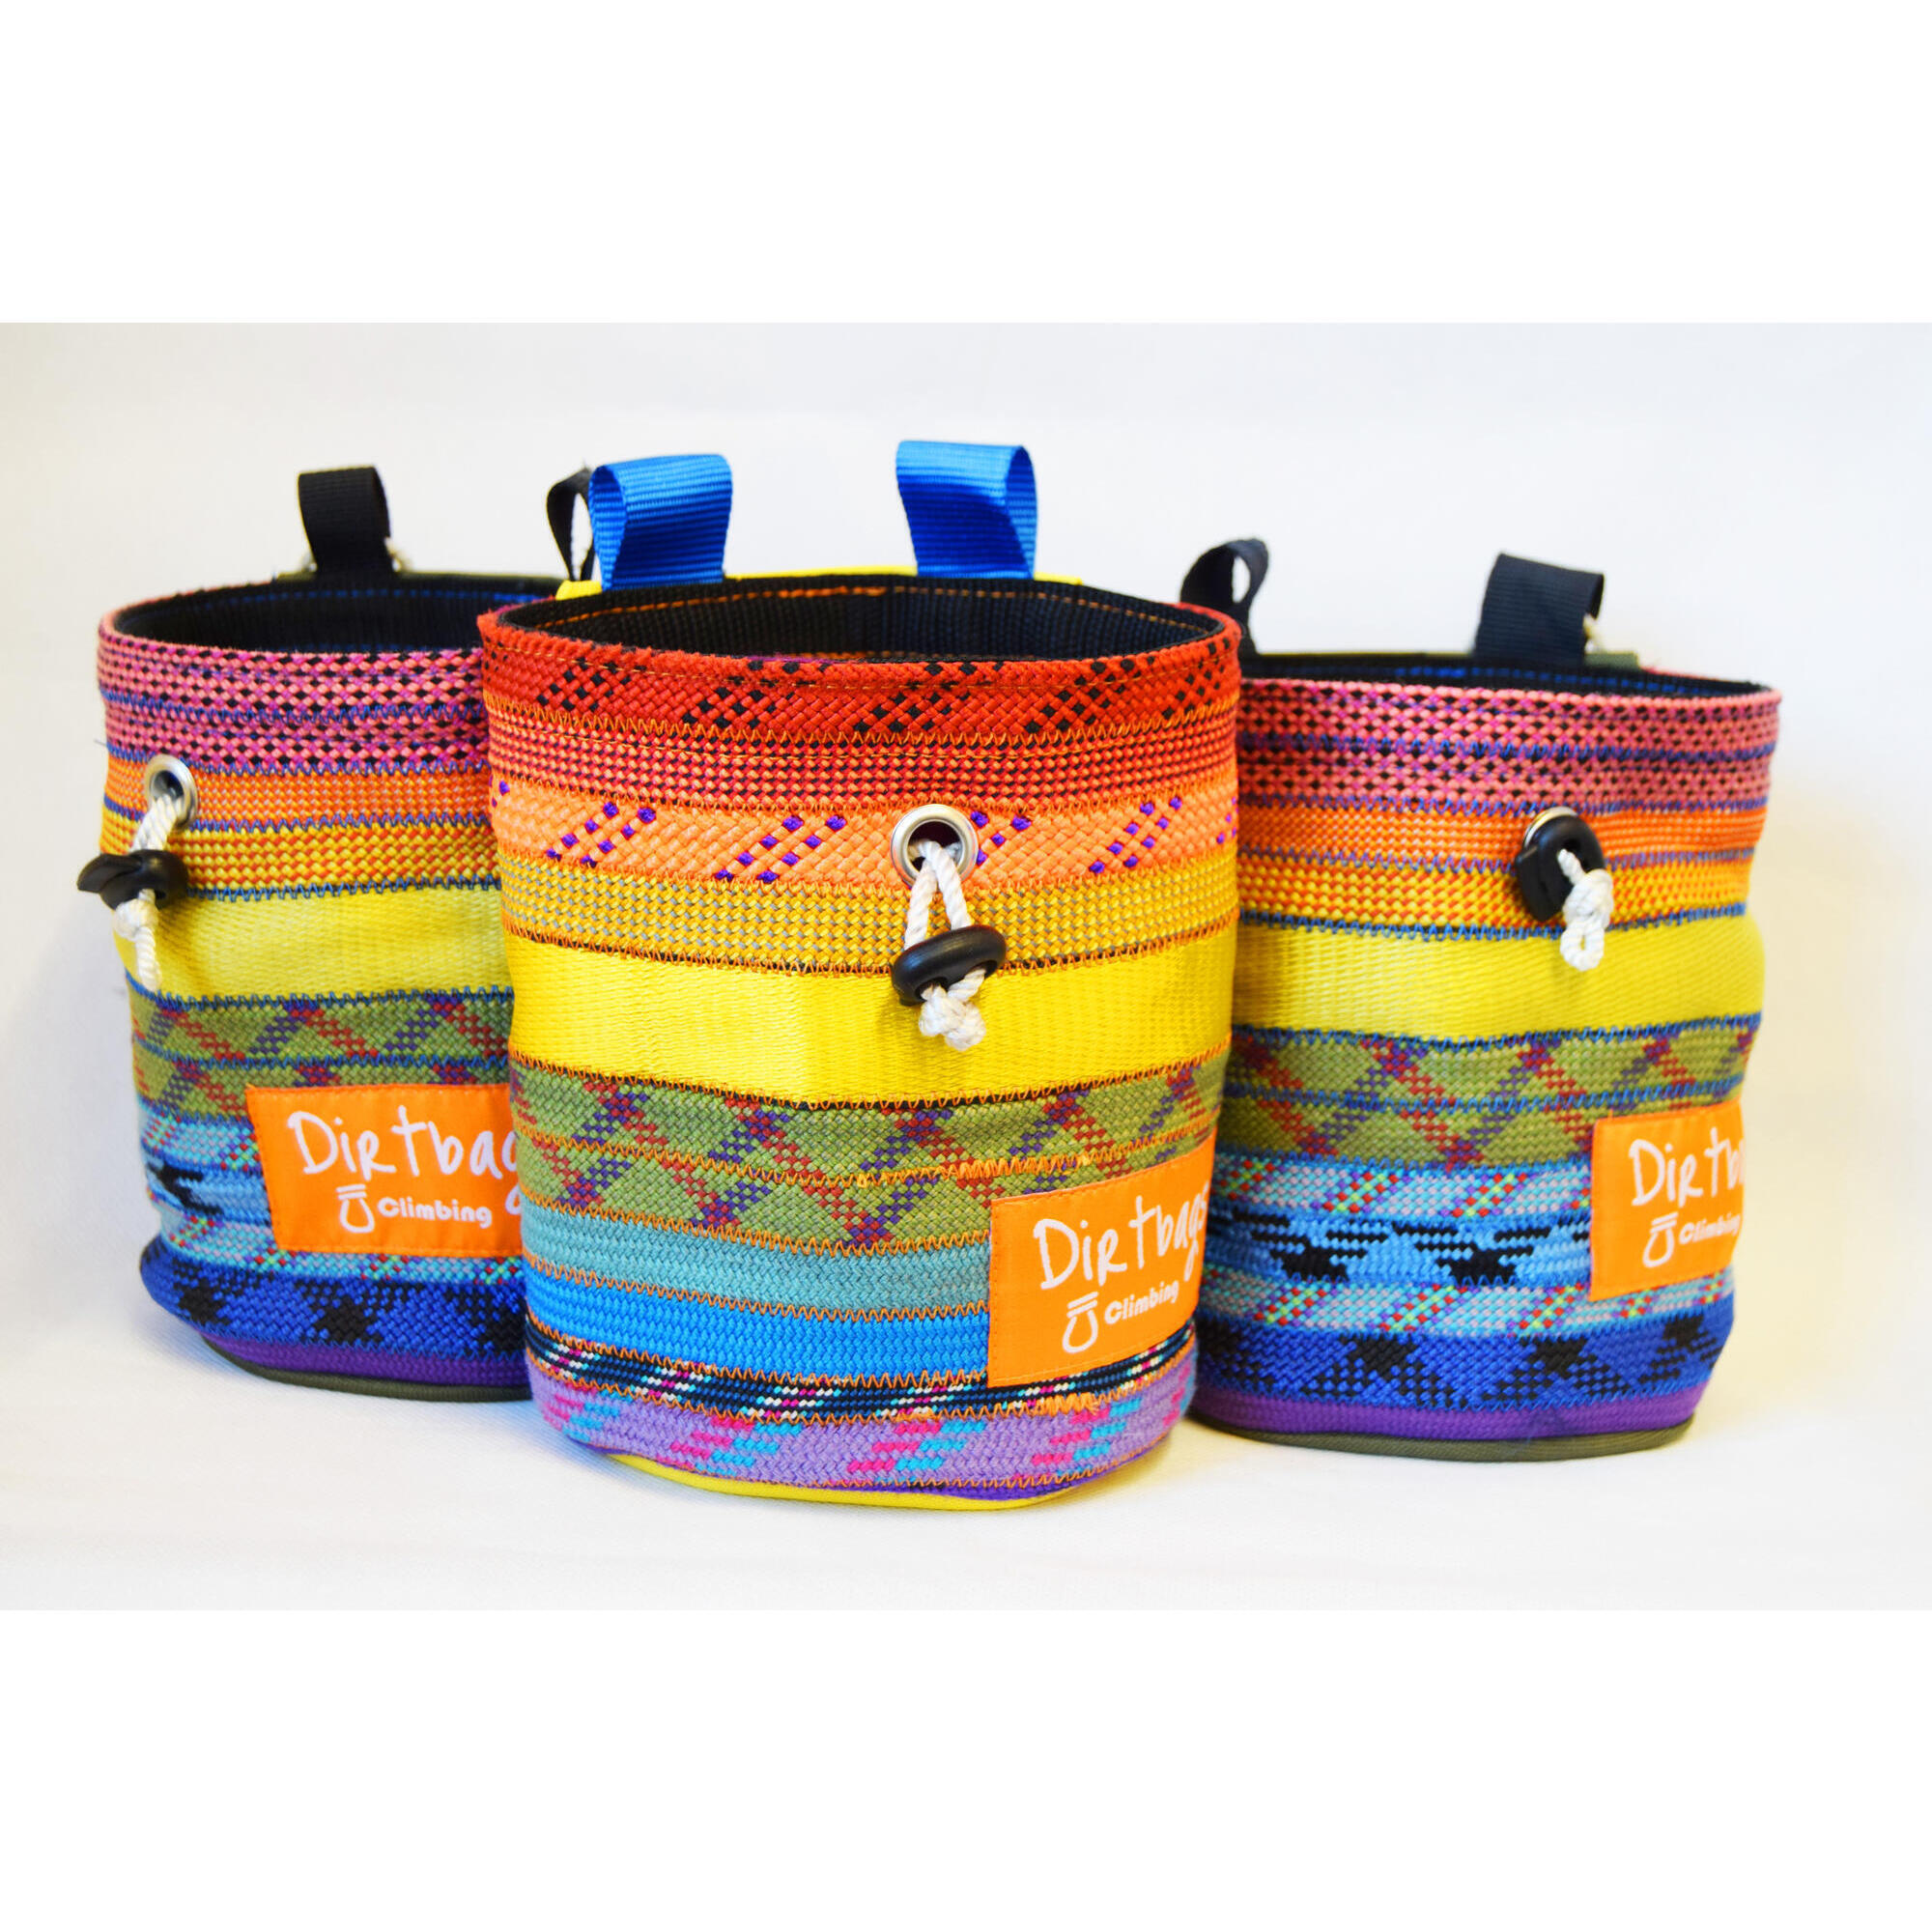 DIRTBAGS CLIMBING Recycled climbing rope chalk bag, made in the UK / Rainbow coloured